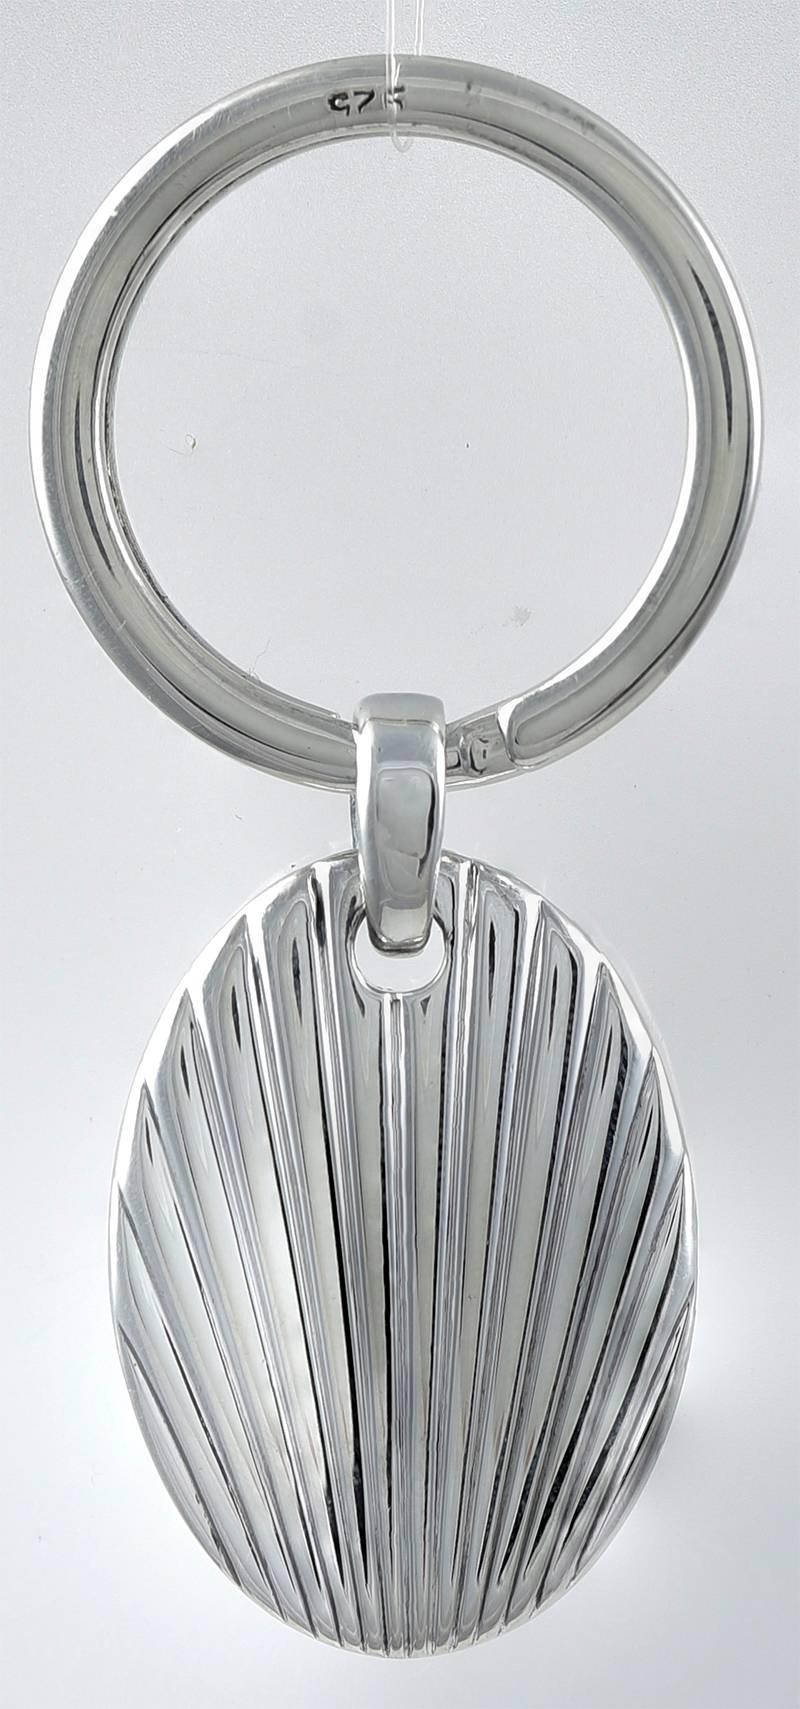 Outstanding quality key ring. Made & signed by Cartier. Very solid and heavy gauge silver. The oval drop has deeply engraved deco lines, front and back. Accented with an applied lapis stone in a bezel. The key ring itself is also sterling. Feels